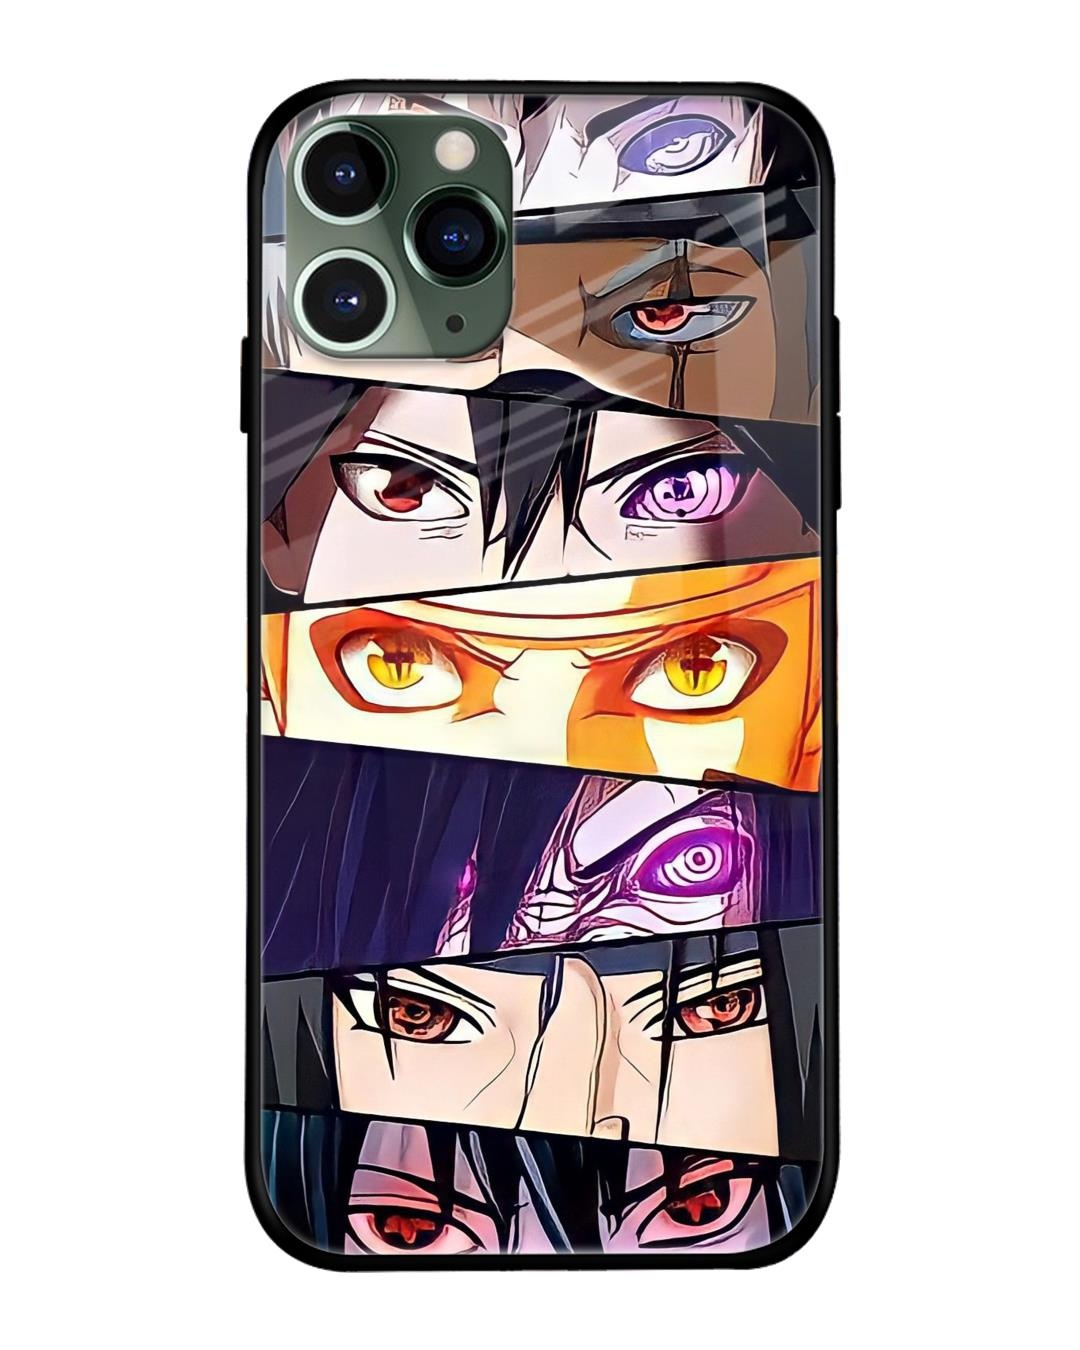 Buy Anime Sketch Premium Glass Case for iPhone 11 Pro Max Shock Proof  Scratch Resistant Online in India at Bewakoof